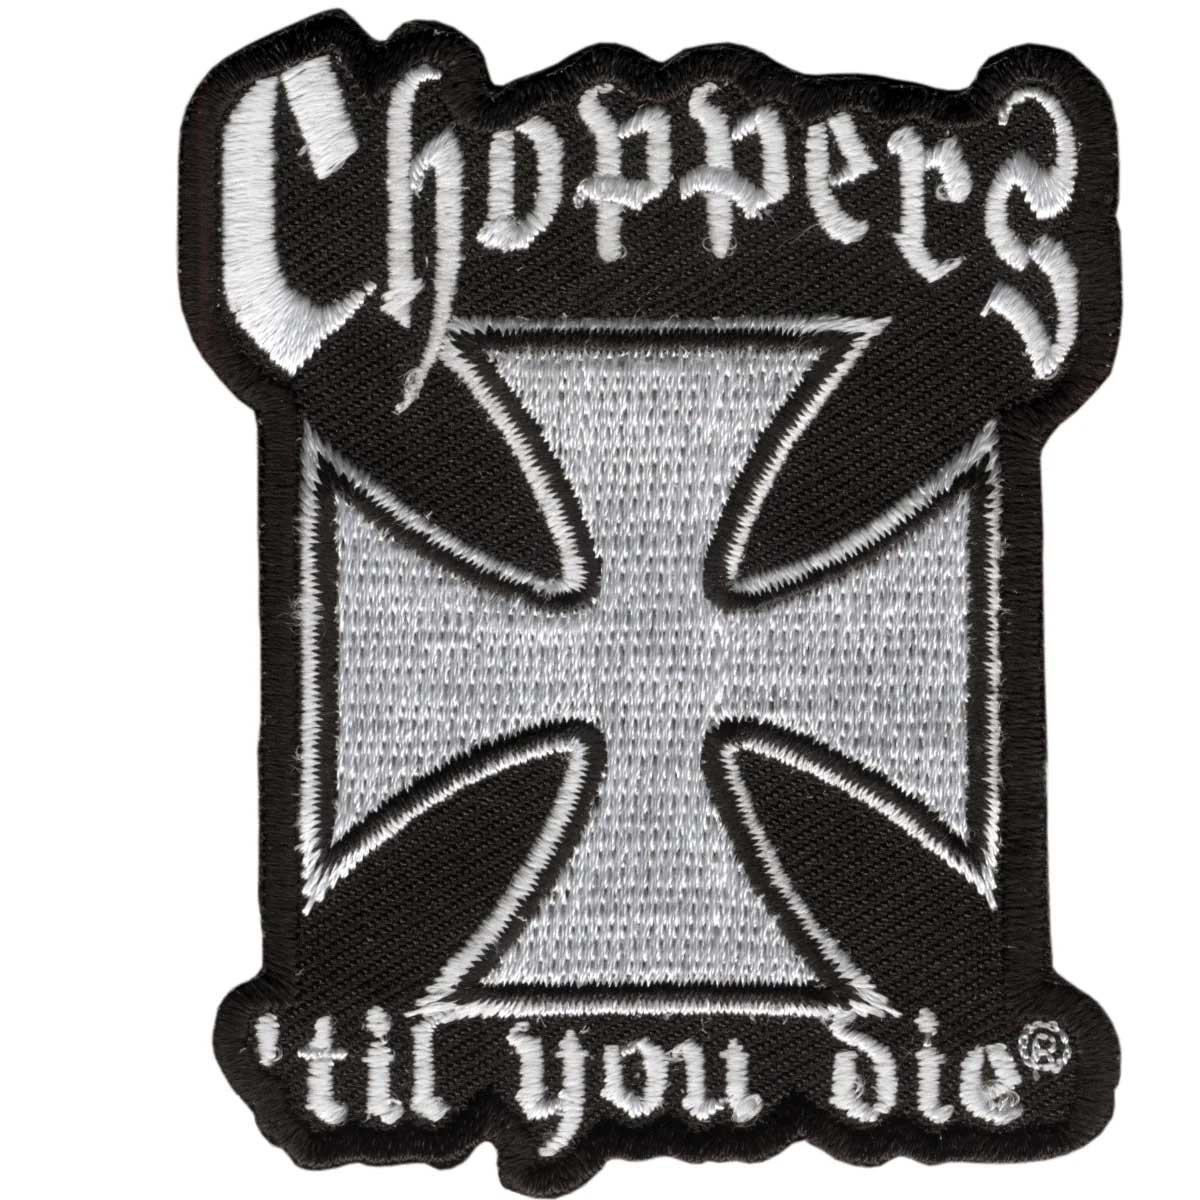 Hot Leathers Choppers Til You Die 3" x 3" Patch PPA1132